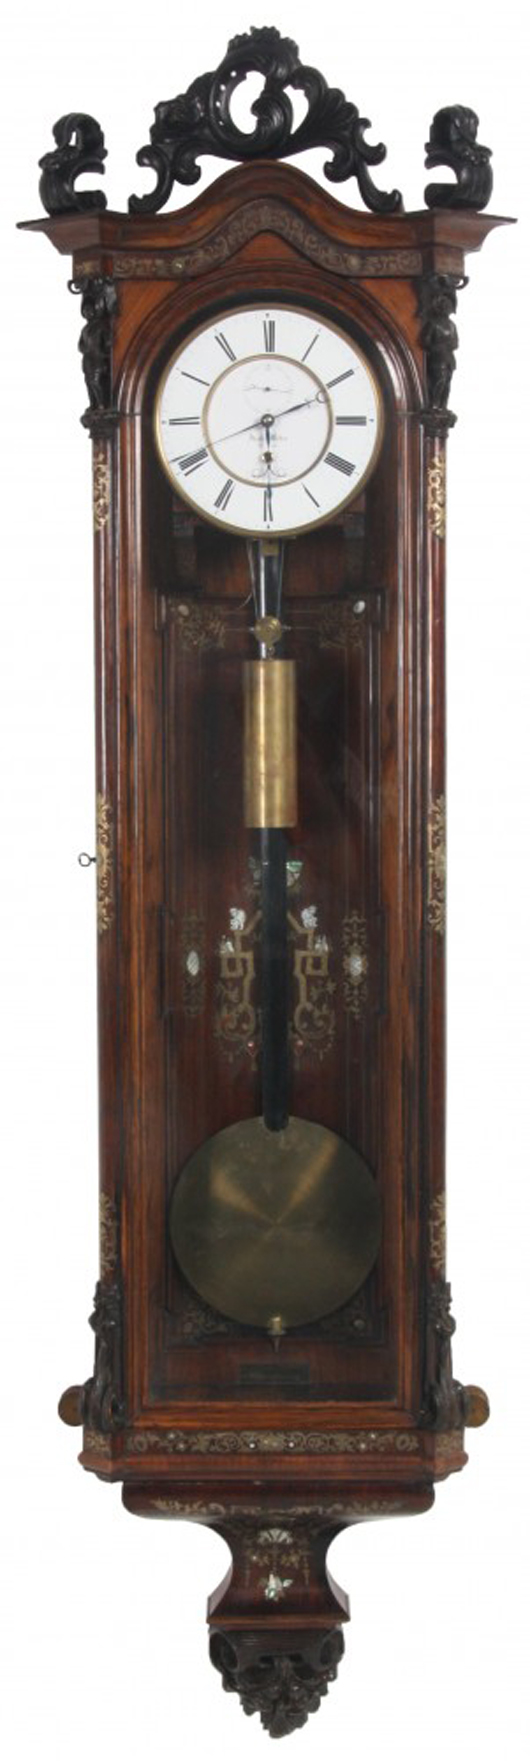 Gorgeous inlaid rosewood Vienna regulator in excellent condition with original finish. Price realized: $25,370. Fontaine’s Auction Gallery image.